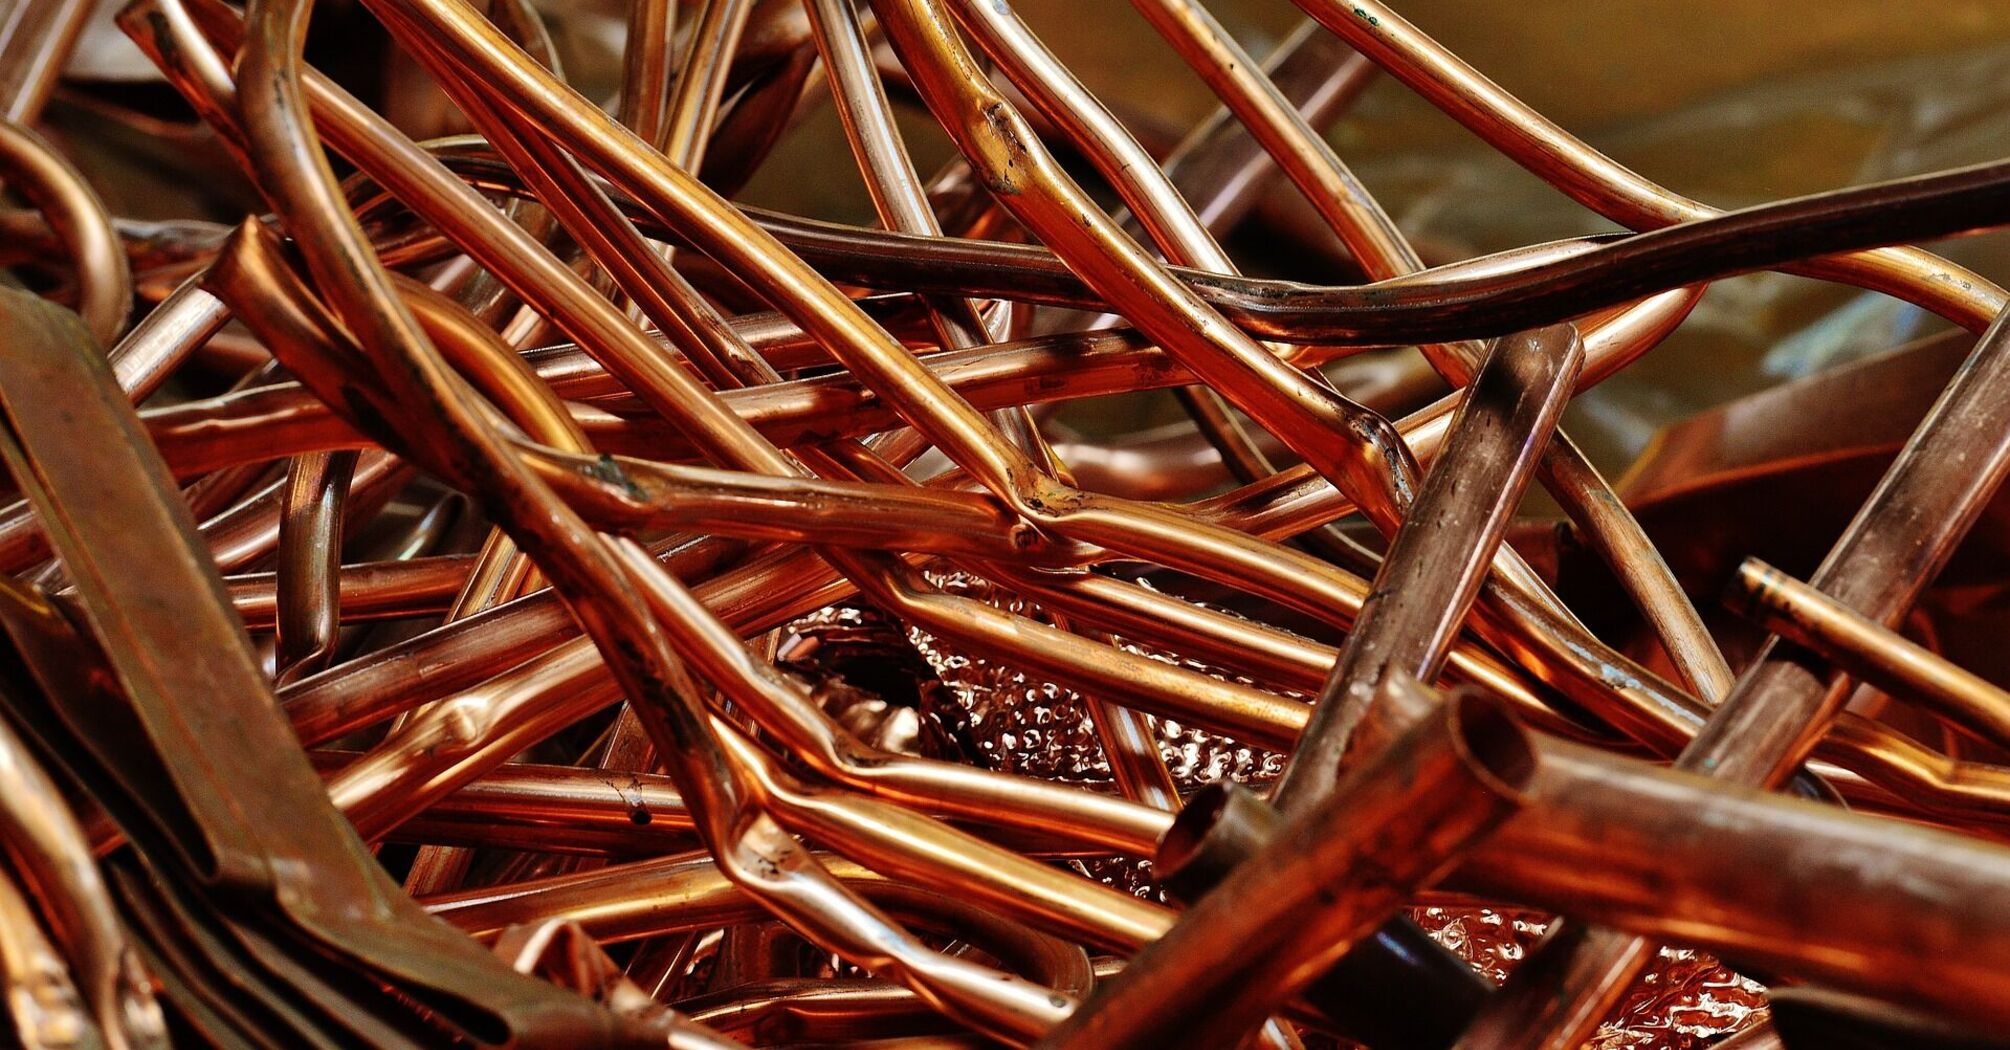 Cases of copper theft have become more frequent in Europe, affecting the railway network